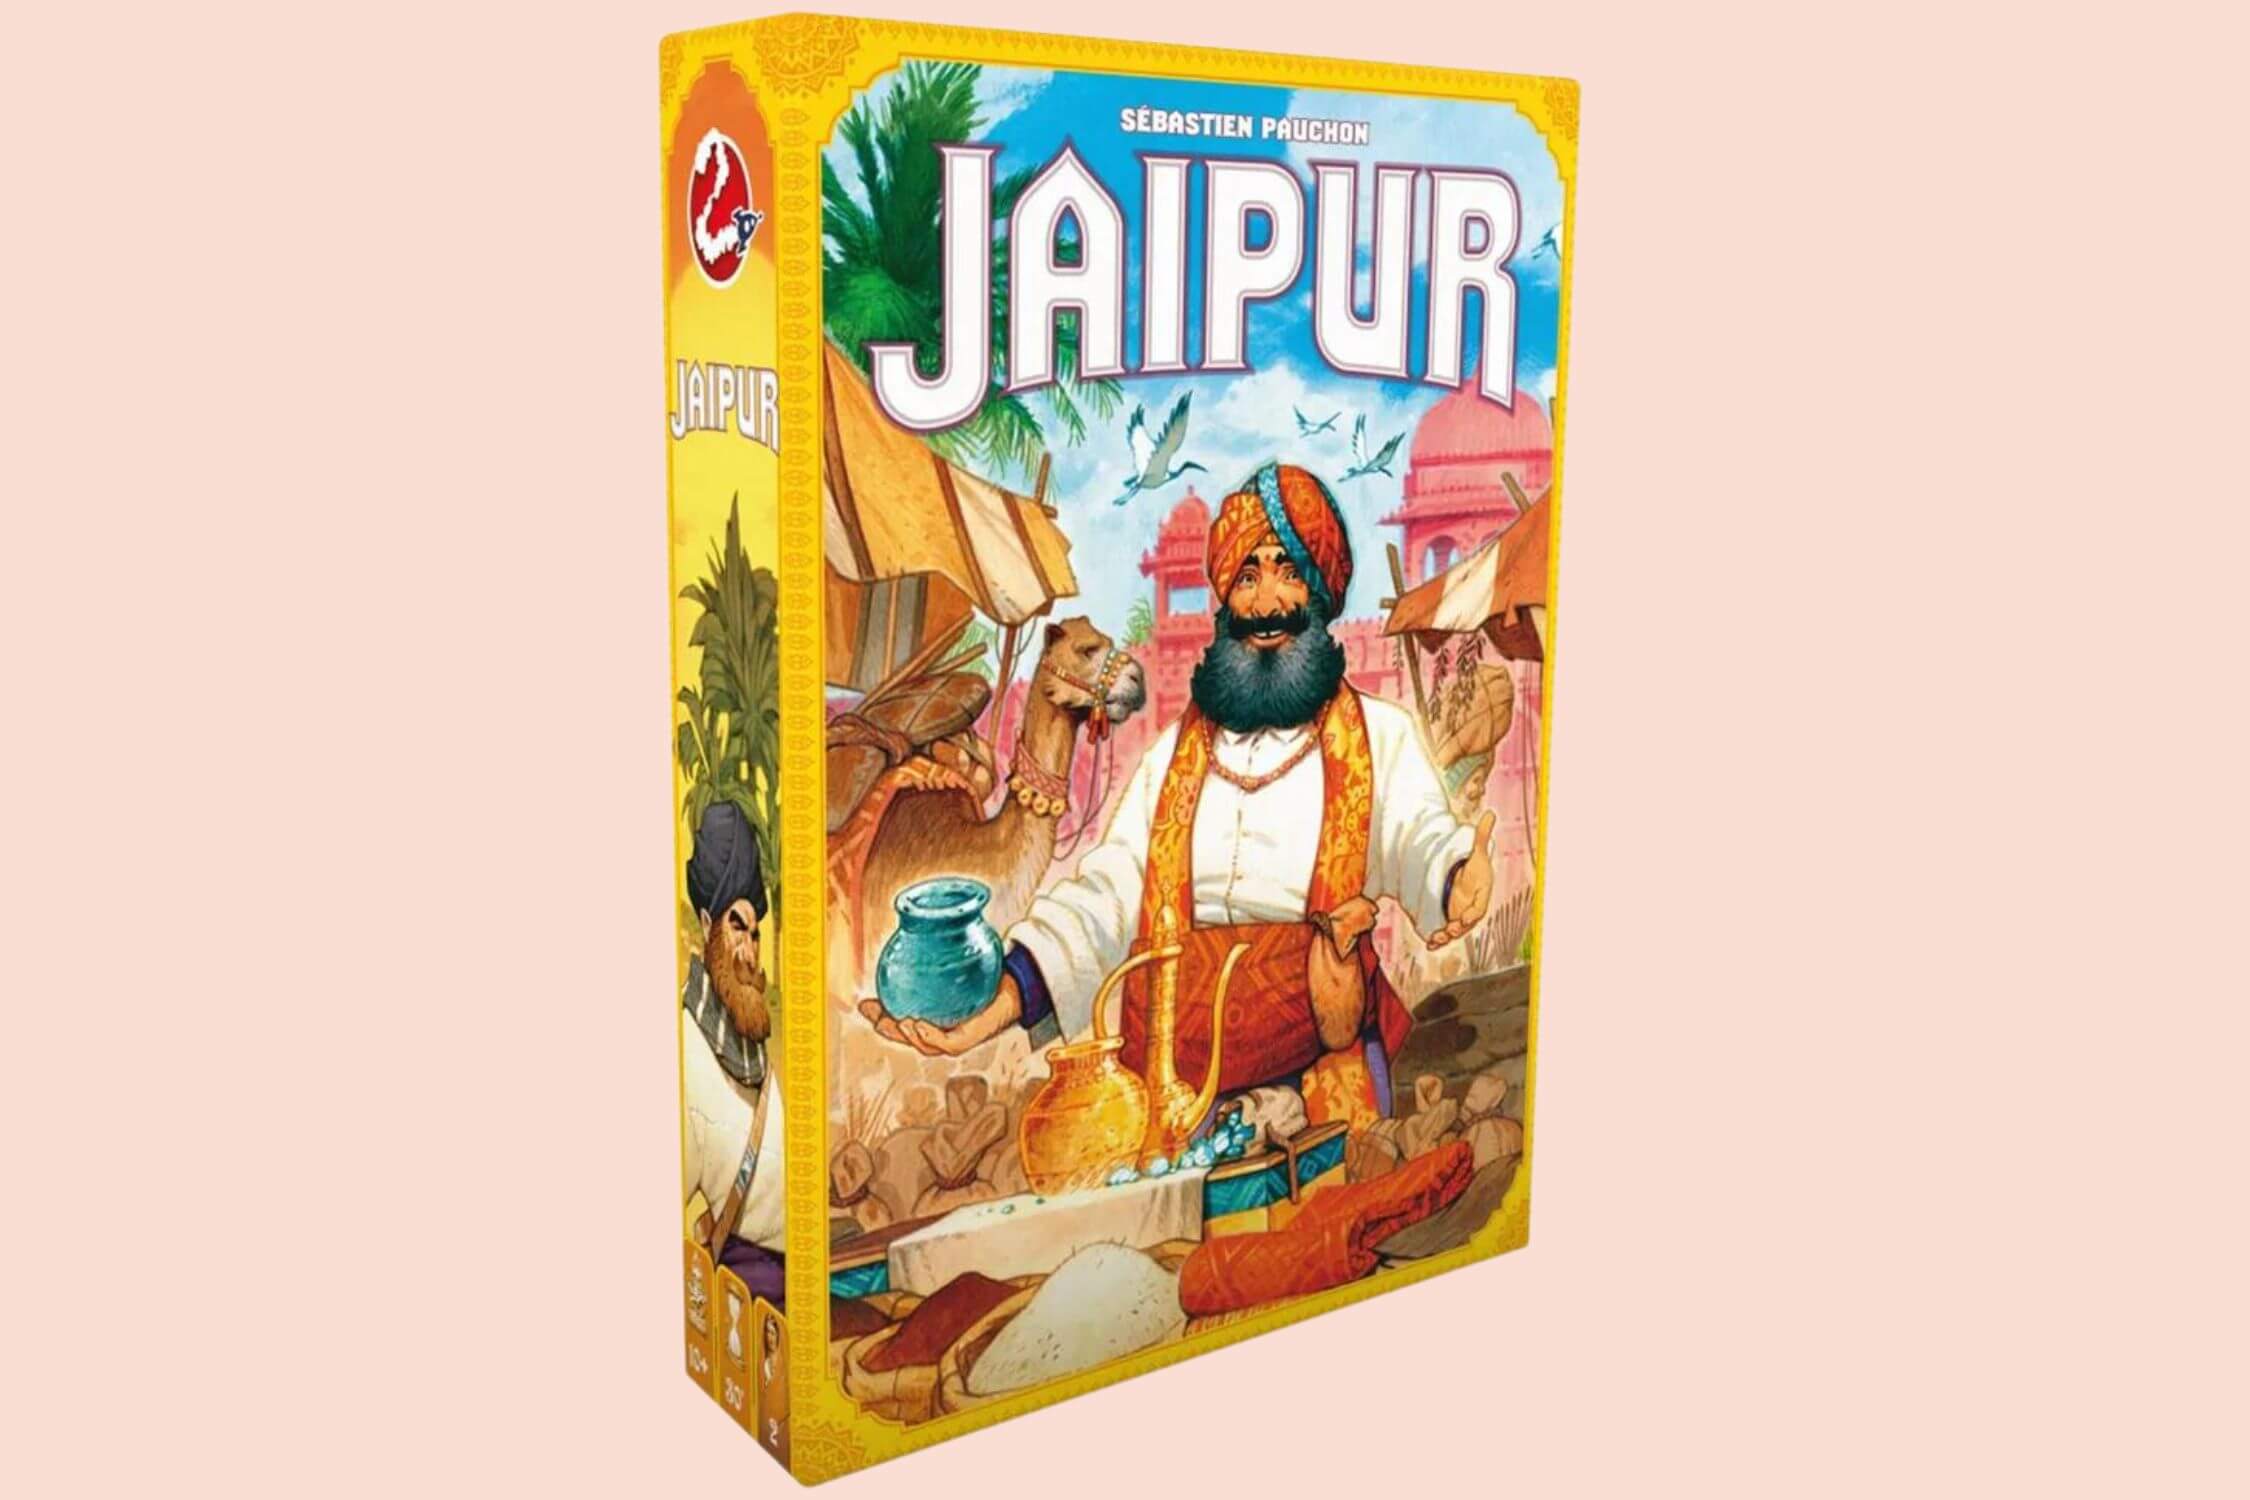 Jaipur - Trade commodities to become wealthy merchant